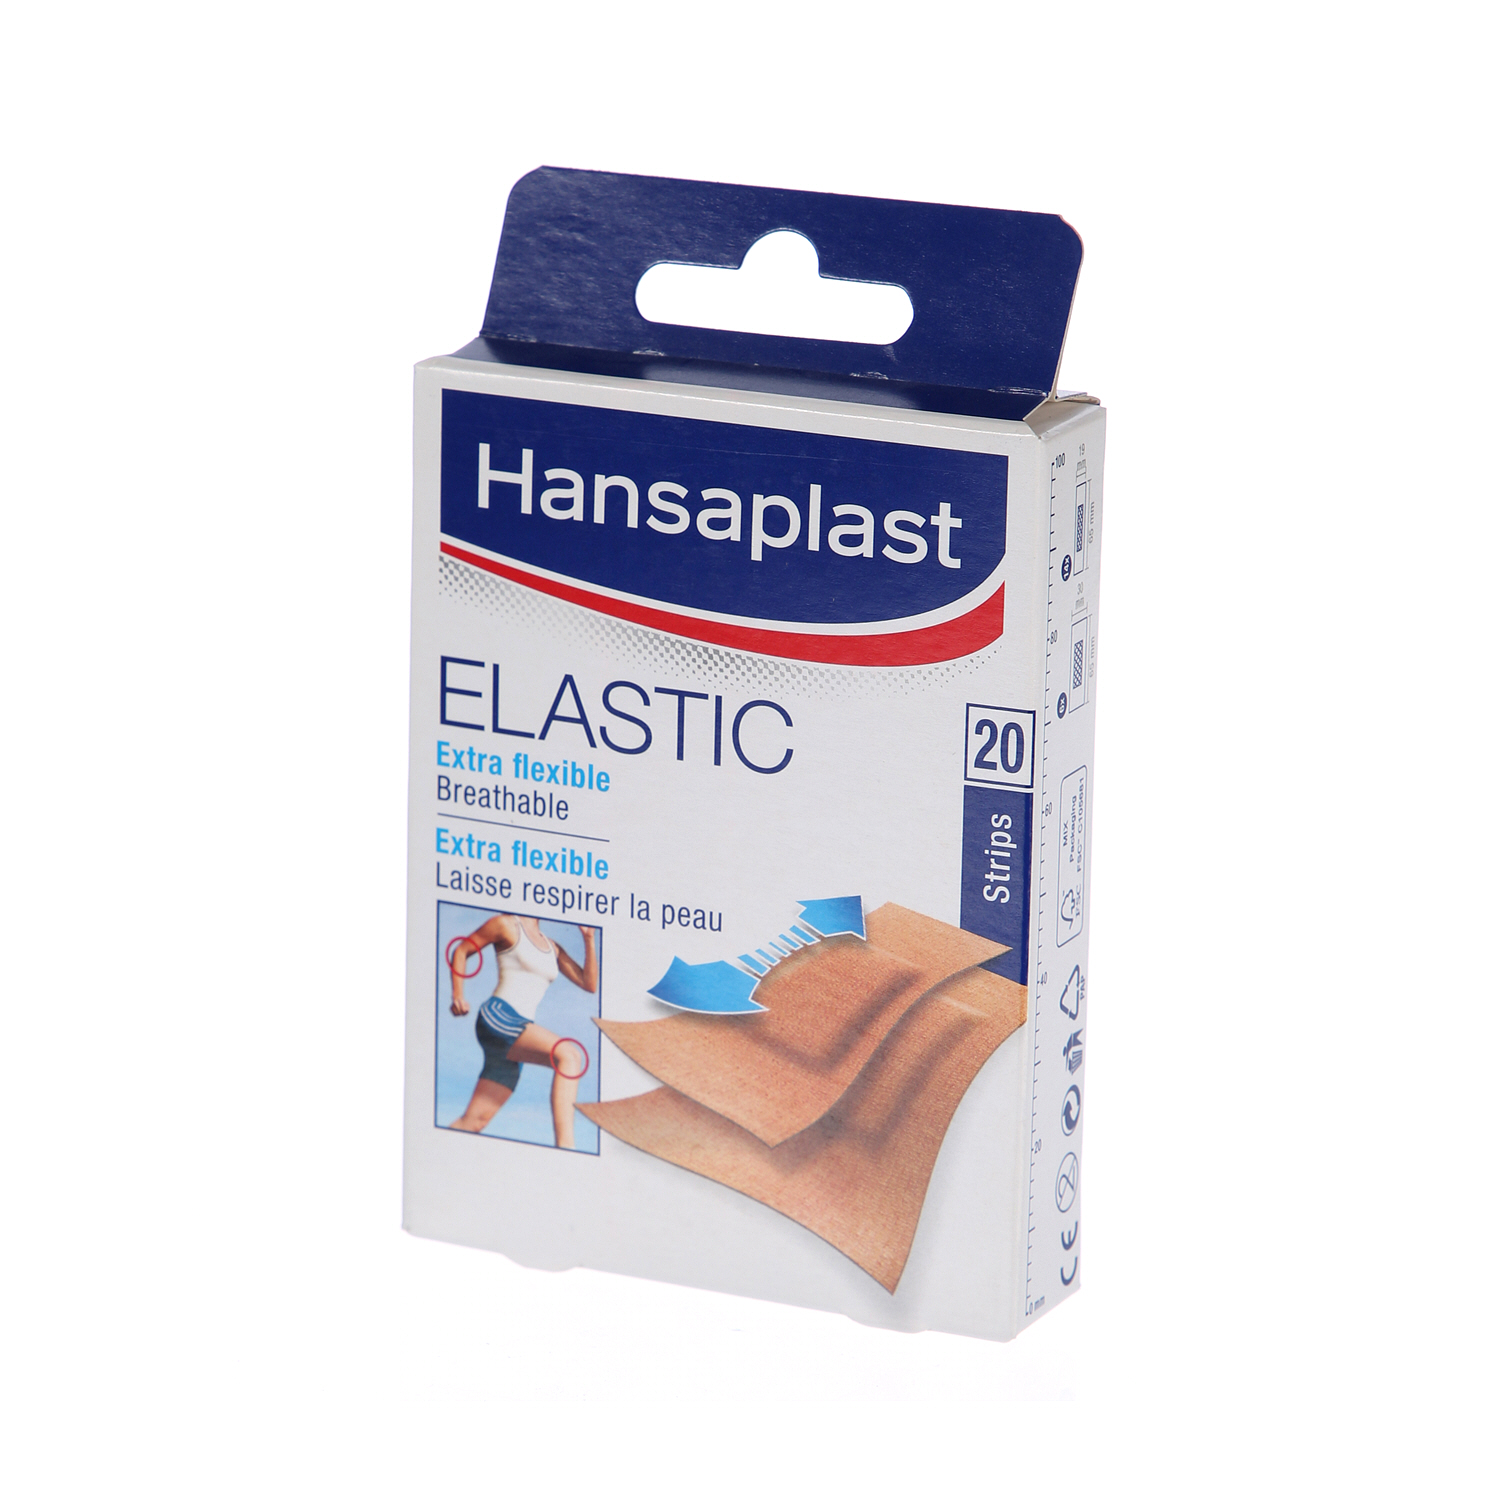 Hansaplast Elastic Plasters Extra Flexible and Breathable Strips 20 Pieces